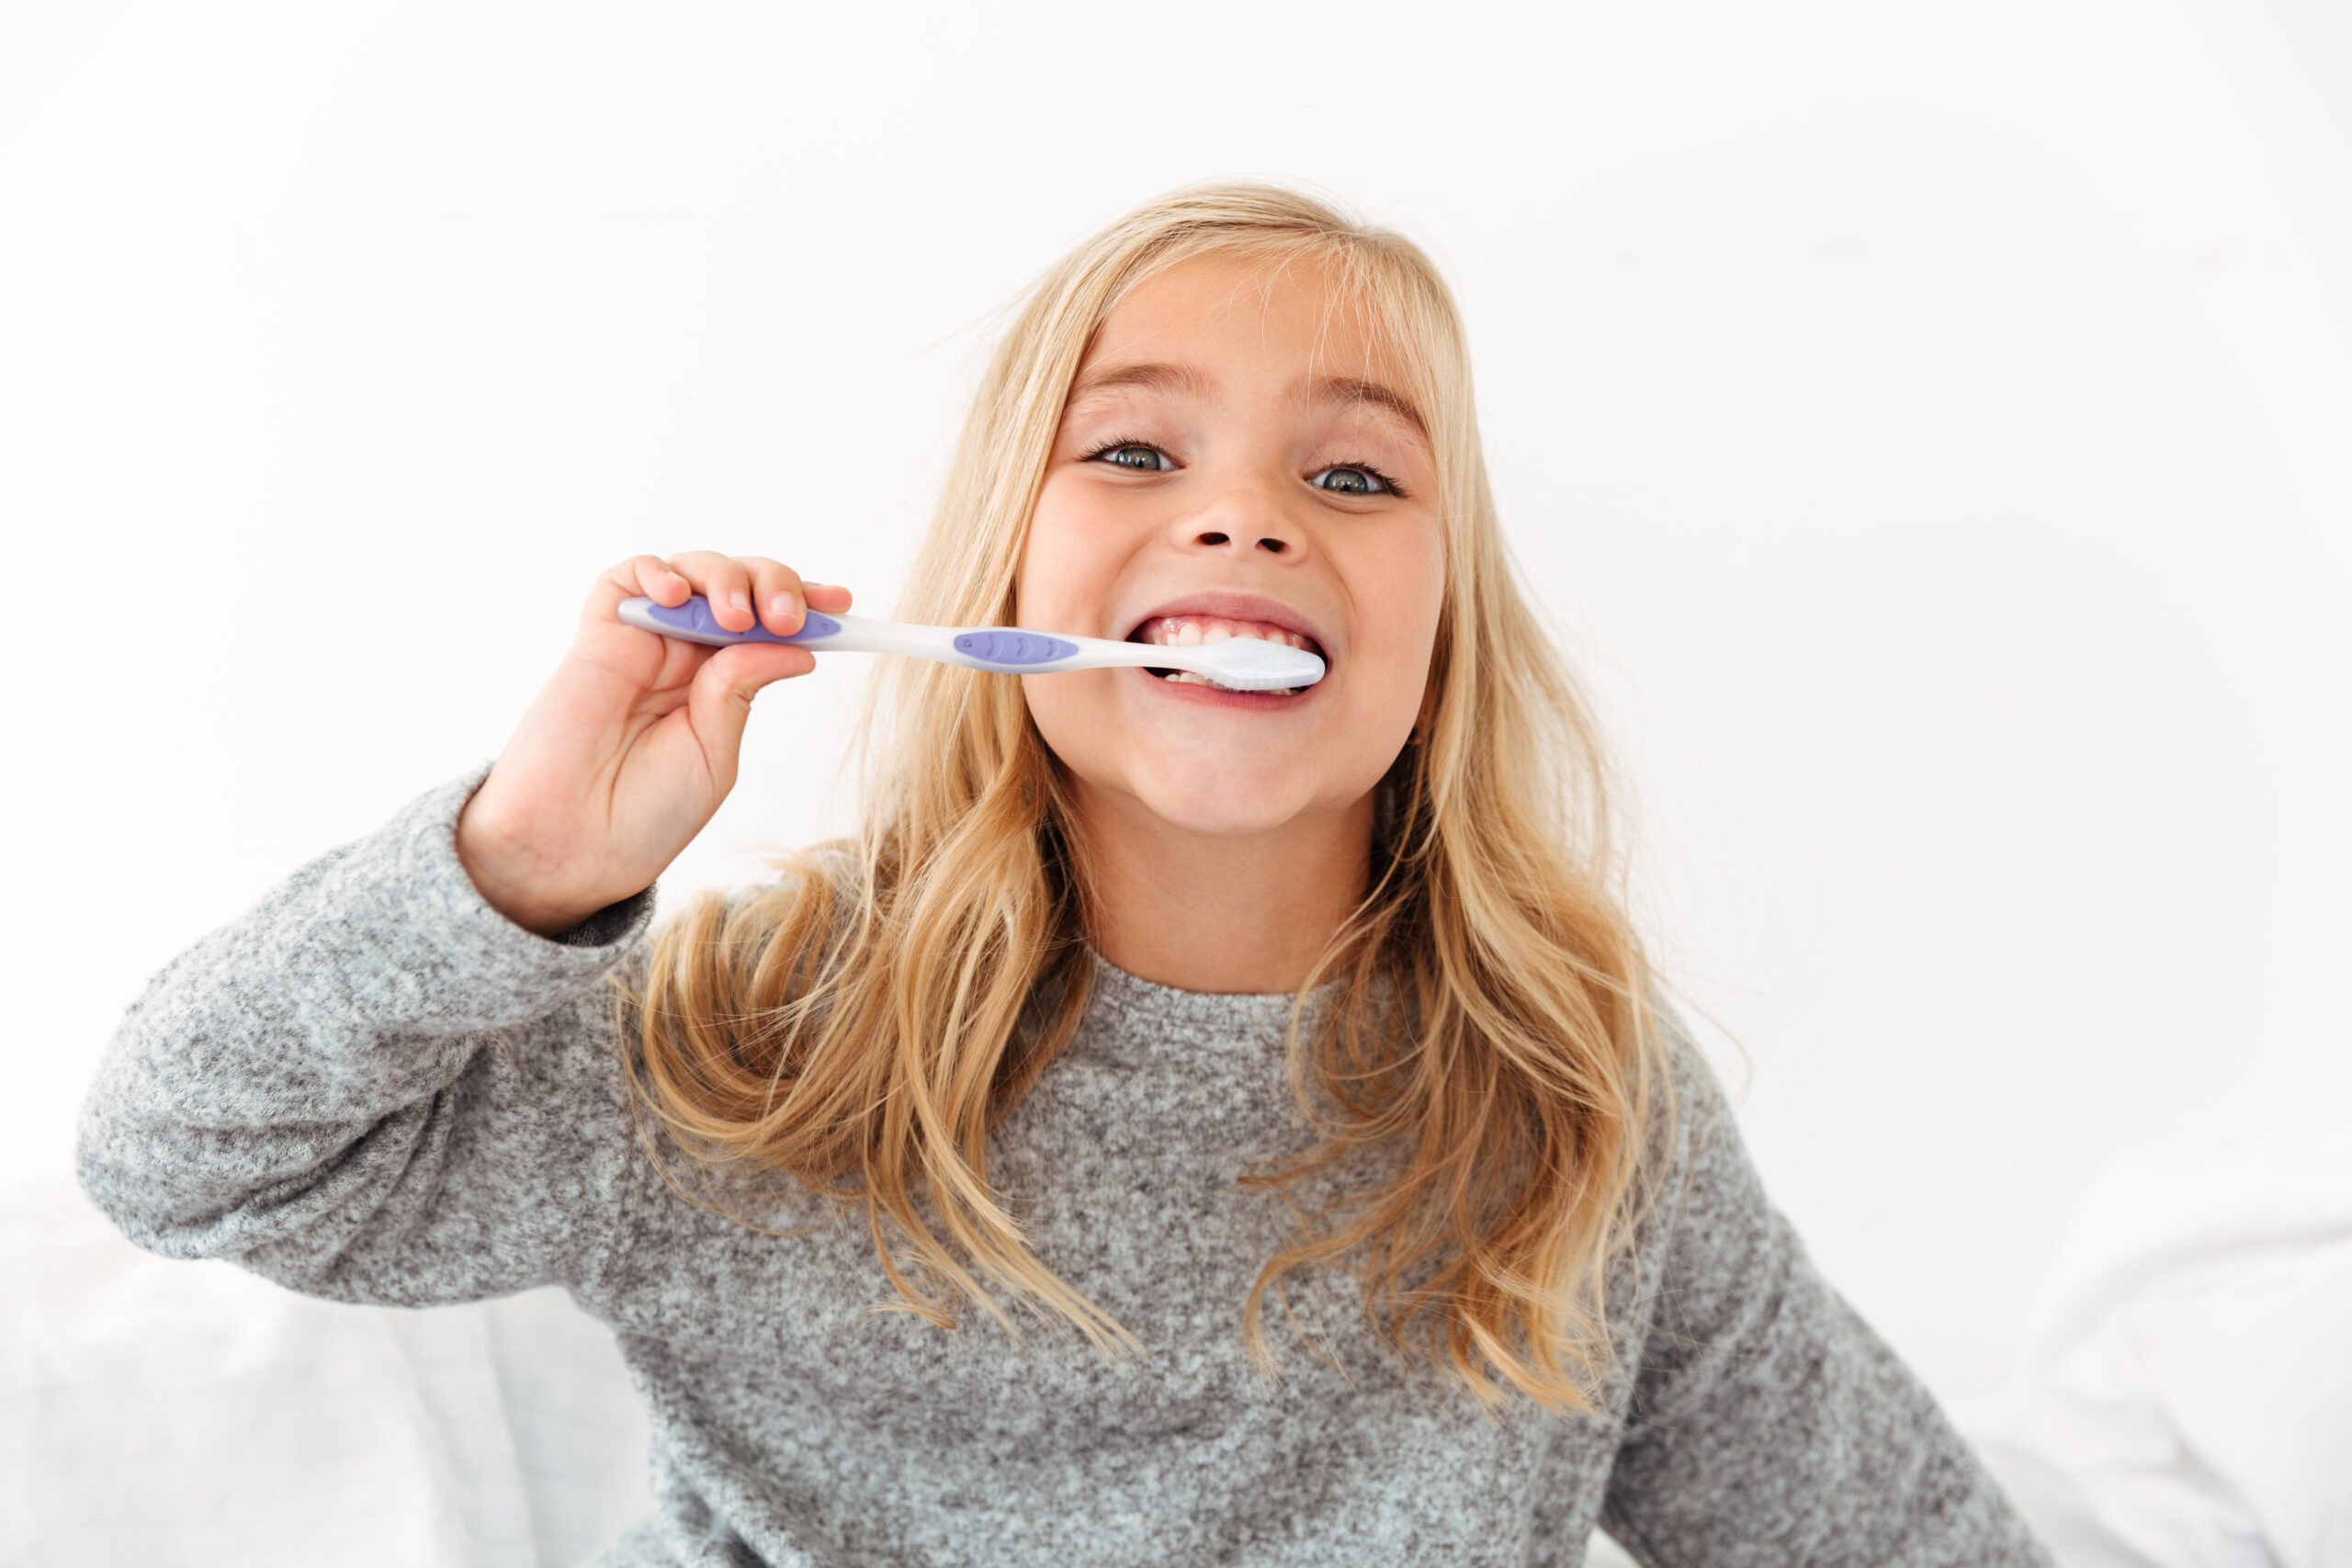 Toothbrush knowhow: caring for your toothbrush